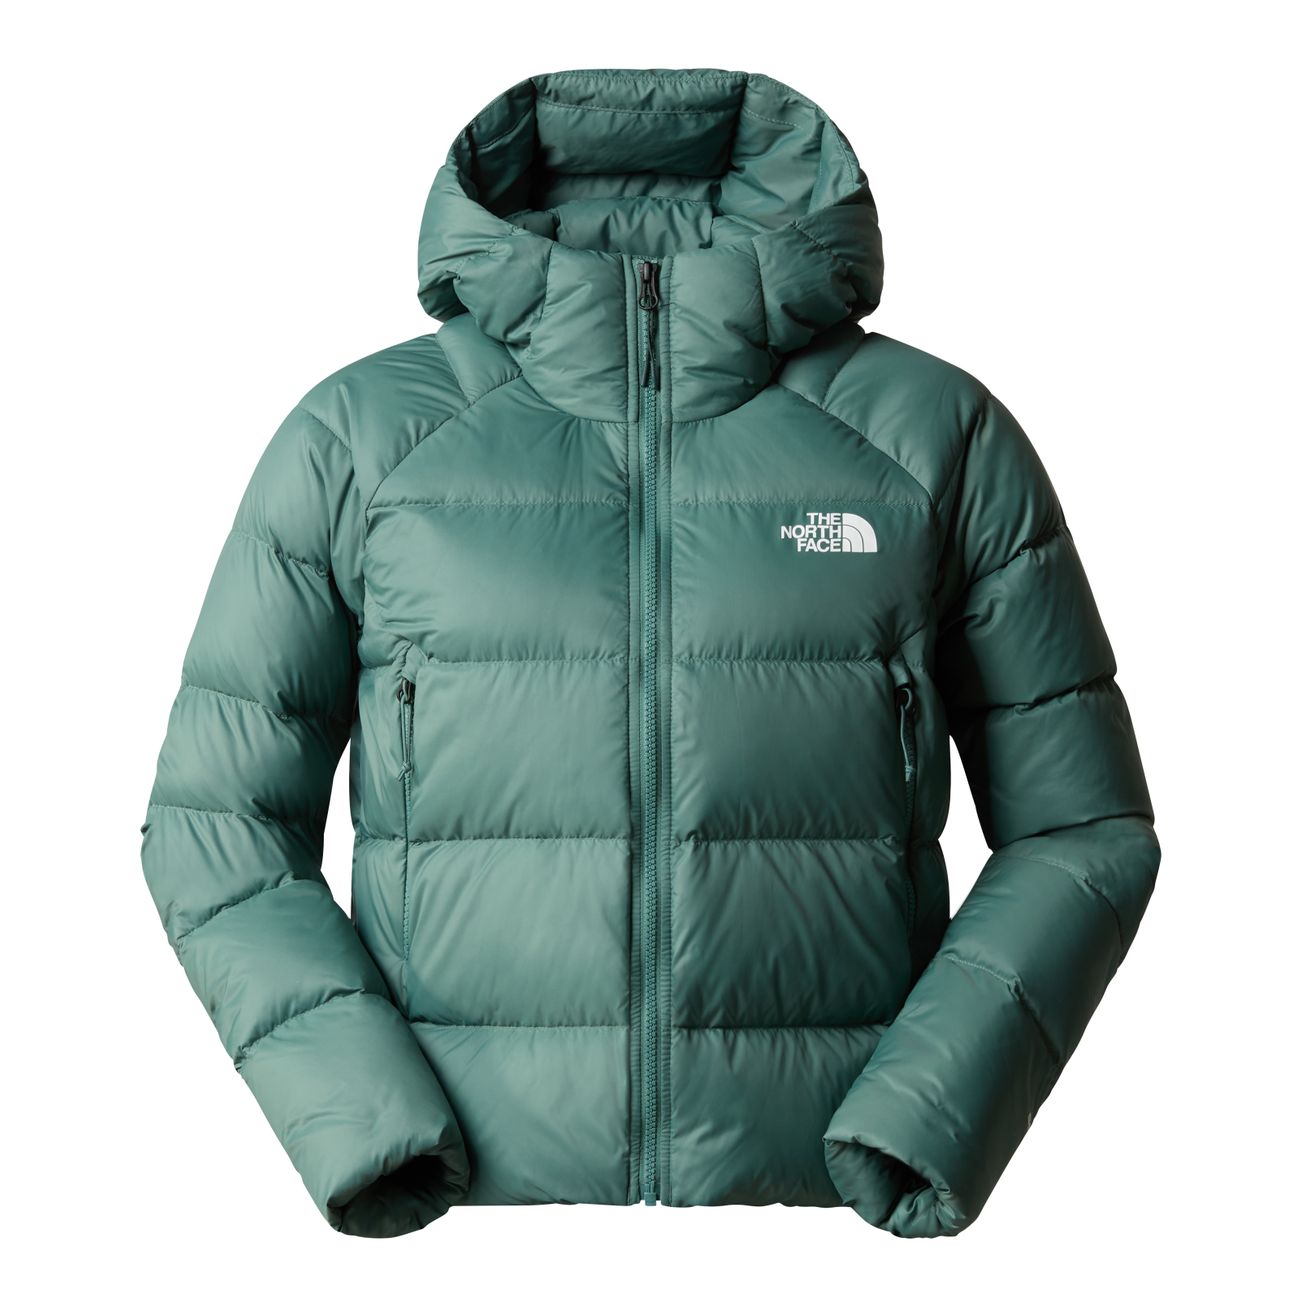 THE NORTH FACE HYALITE DOWN JACKET WITH HOOD Damen Winterjacke - The North Face - SAGATOO -